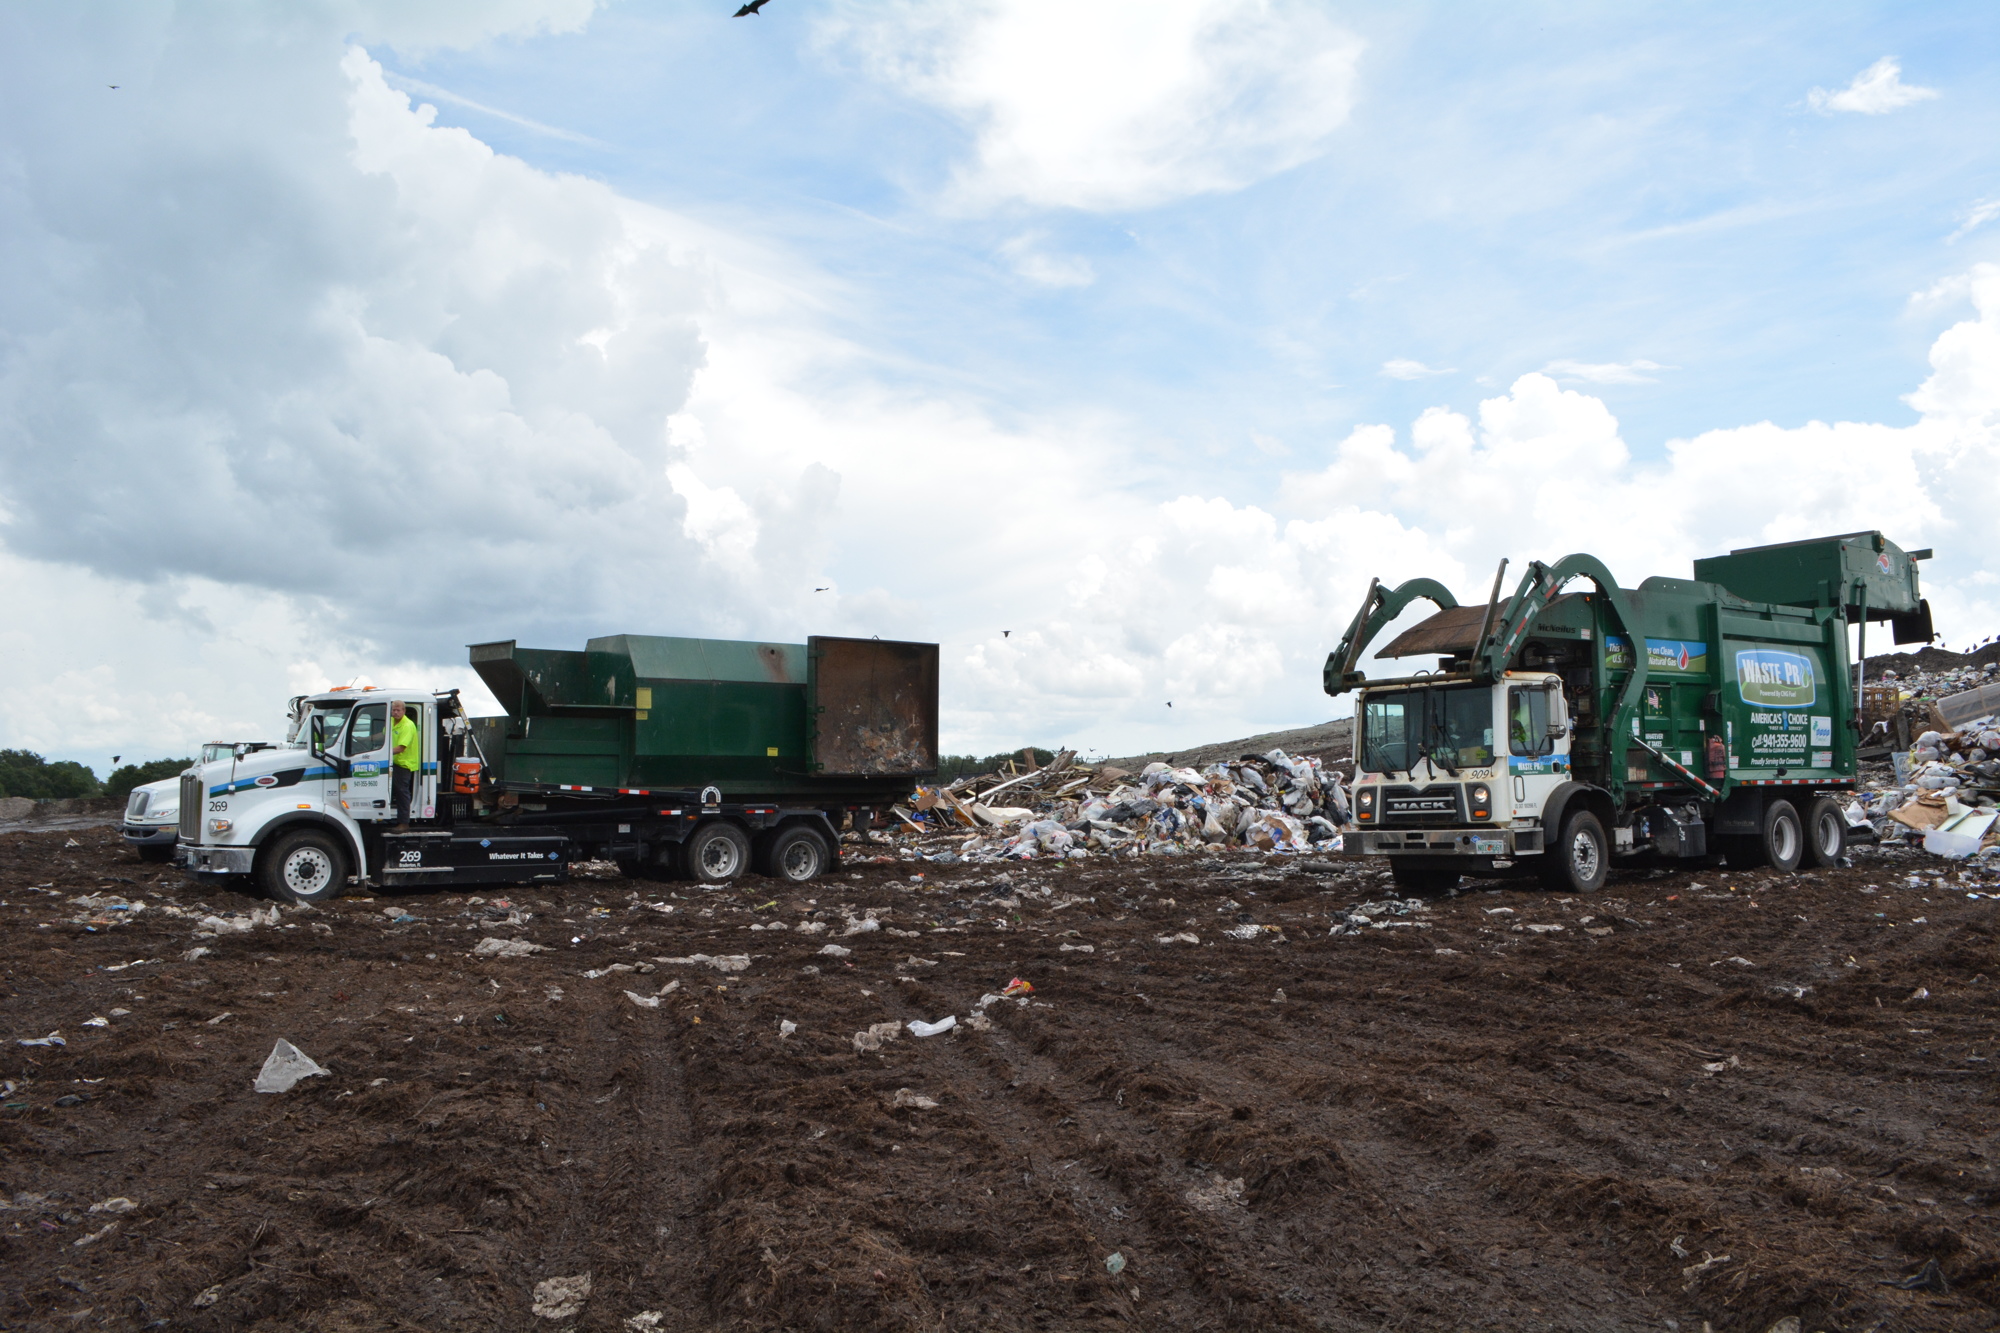 Dump trucks deliver waste to the Lena Road Landfill, which is accepting fish killed by red tide.